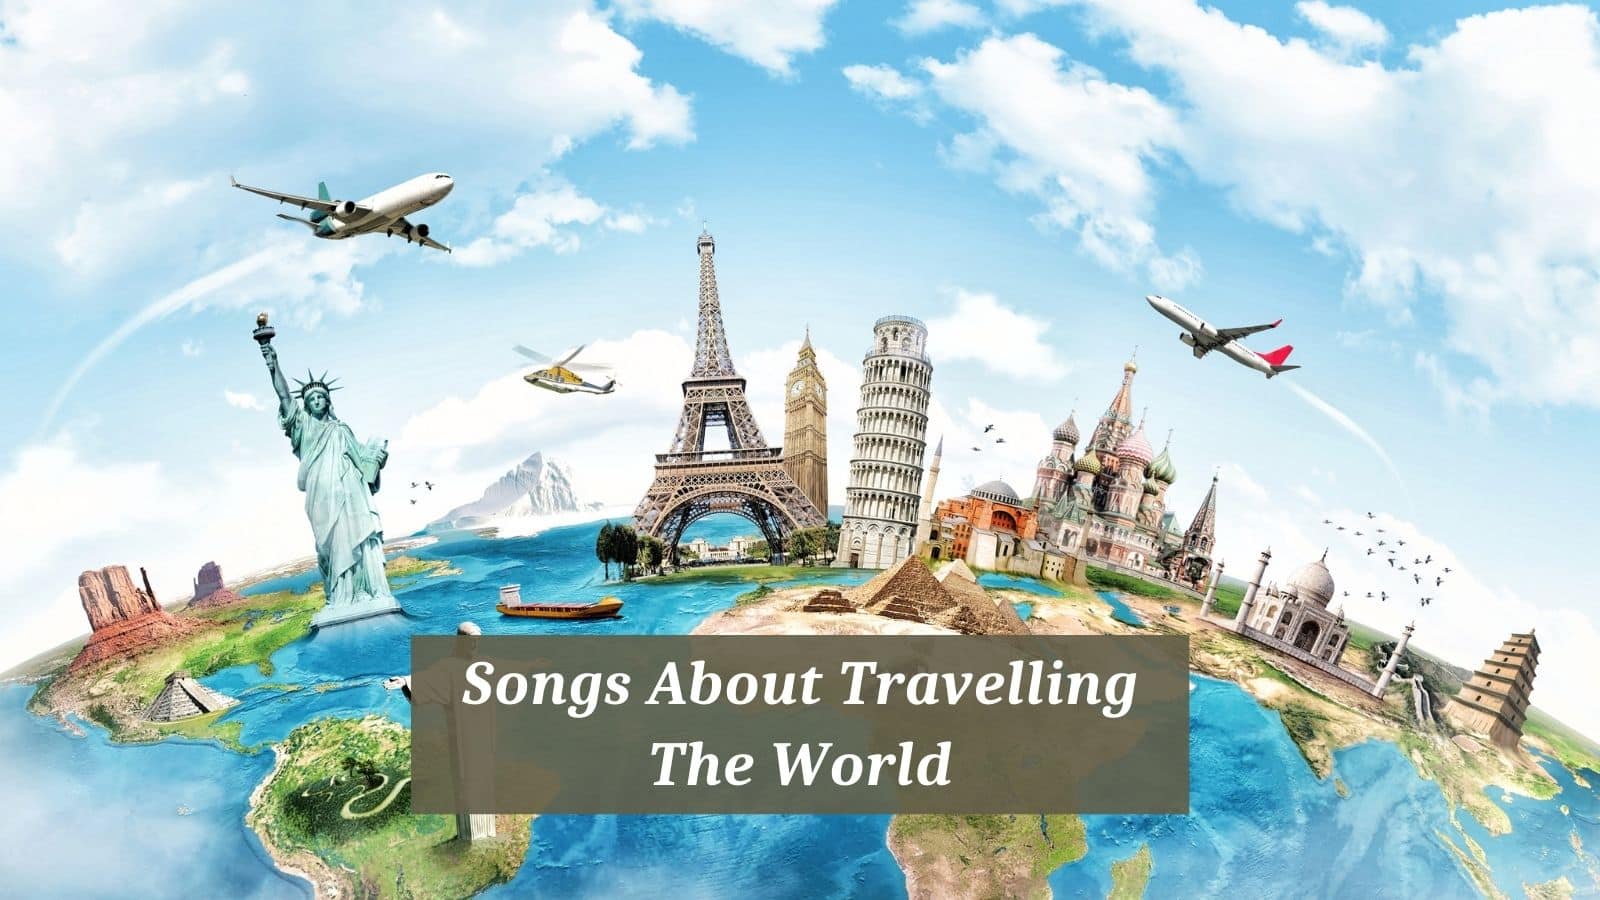 Songs About Travelling The World